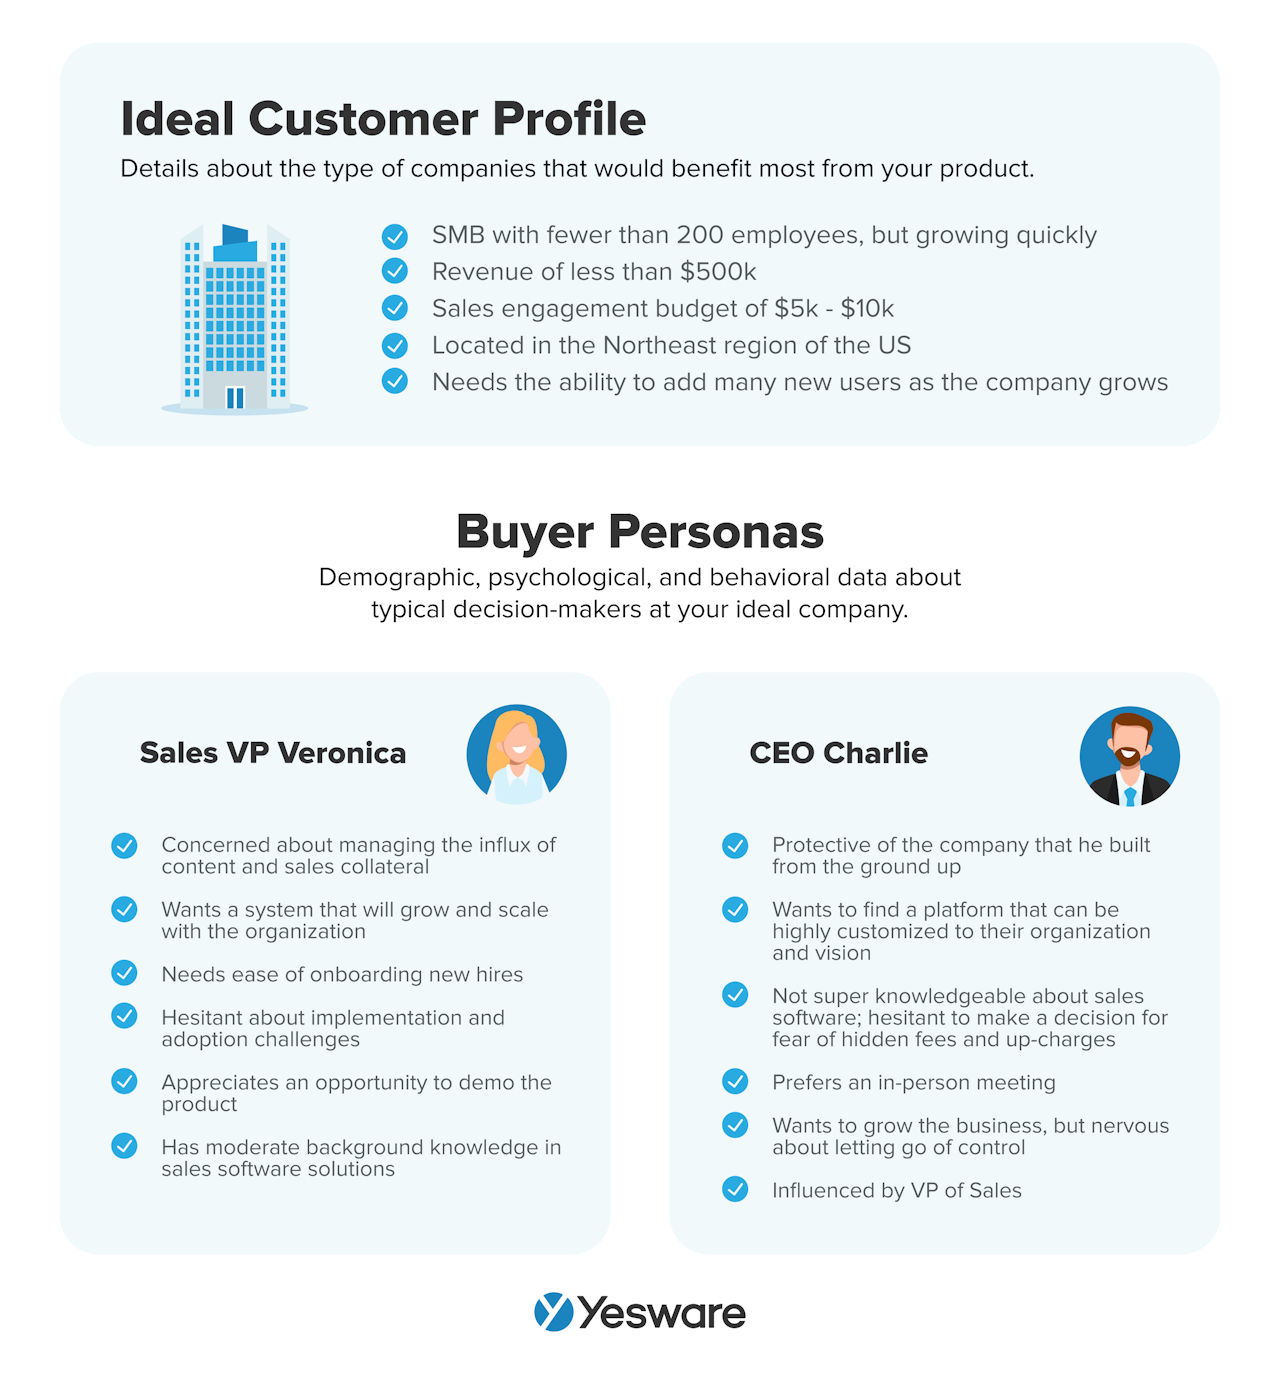 sales negotiation skills: ICP and buyer persona